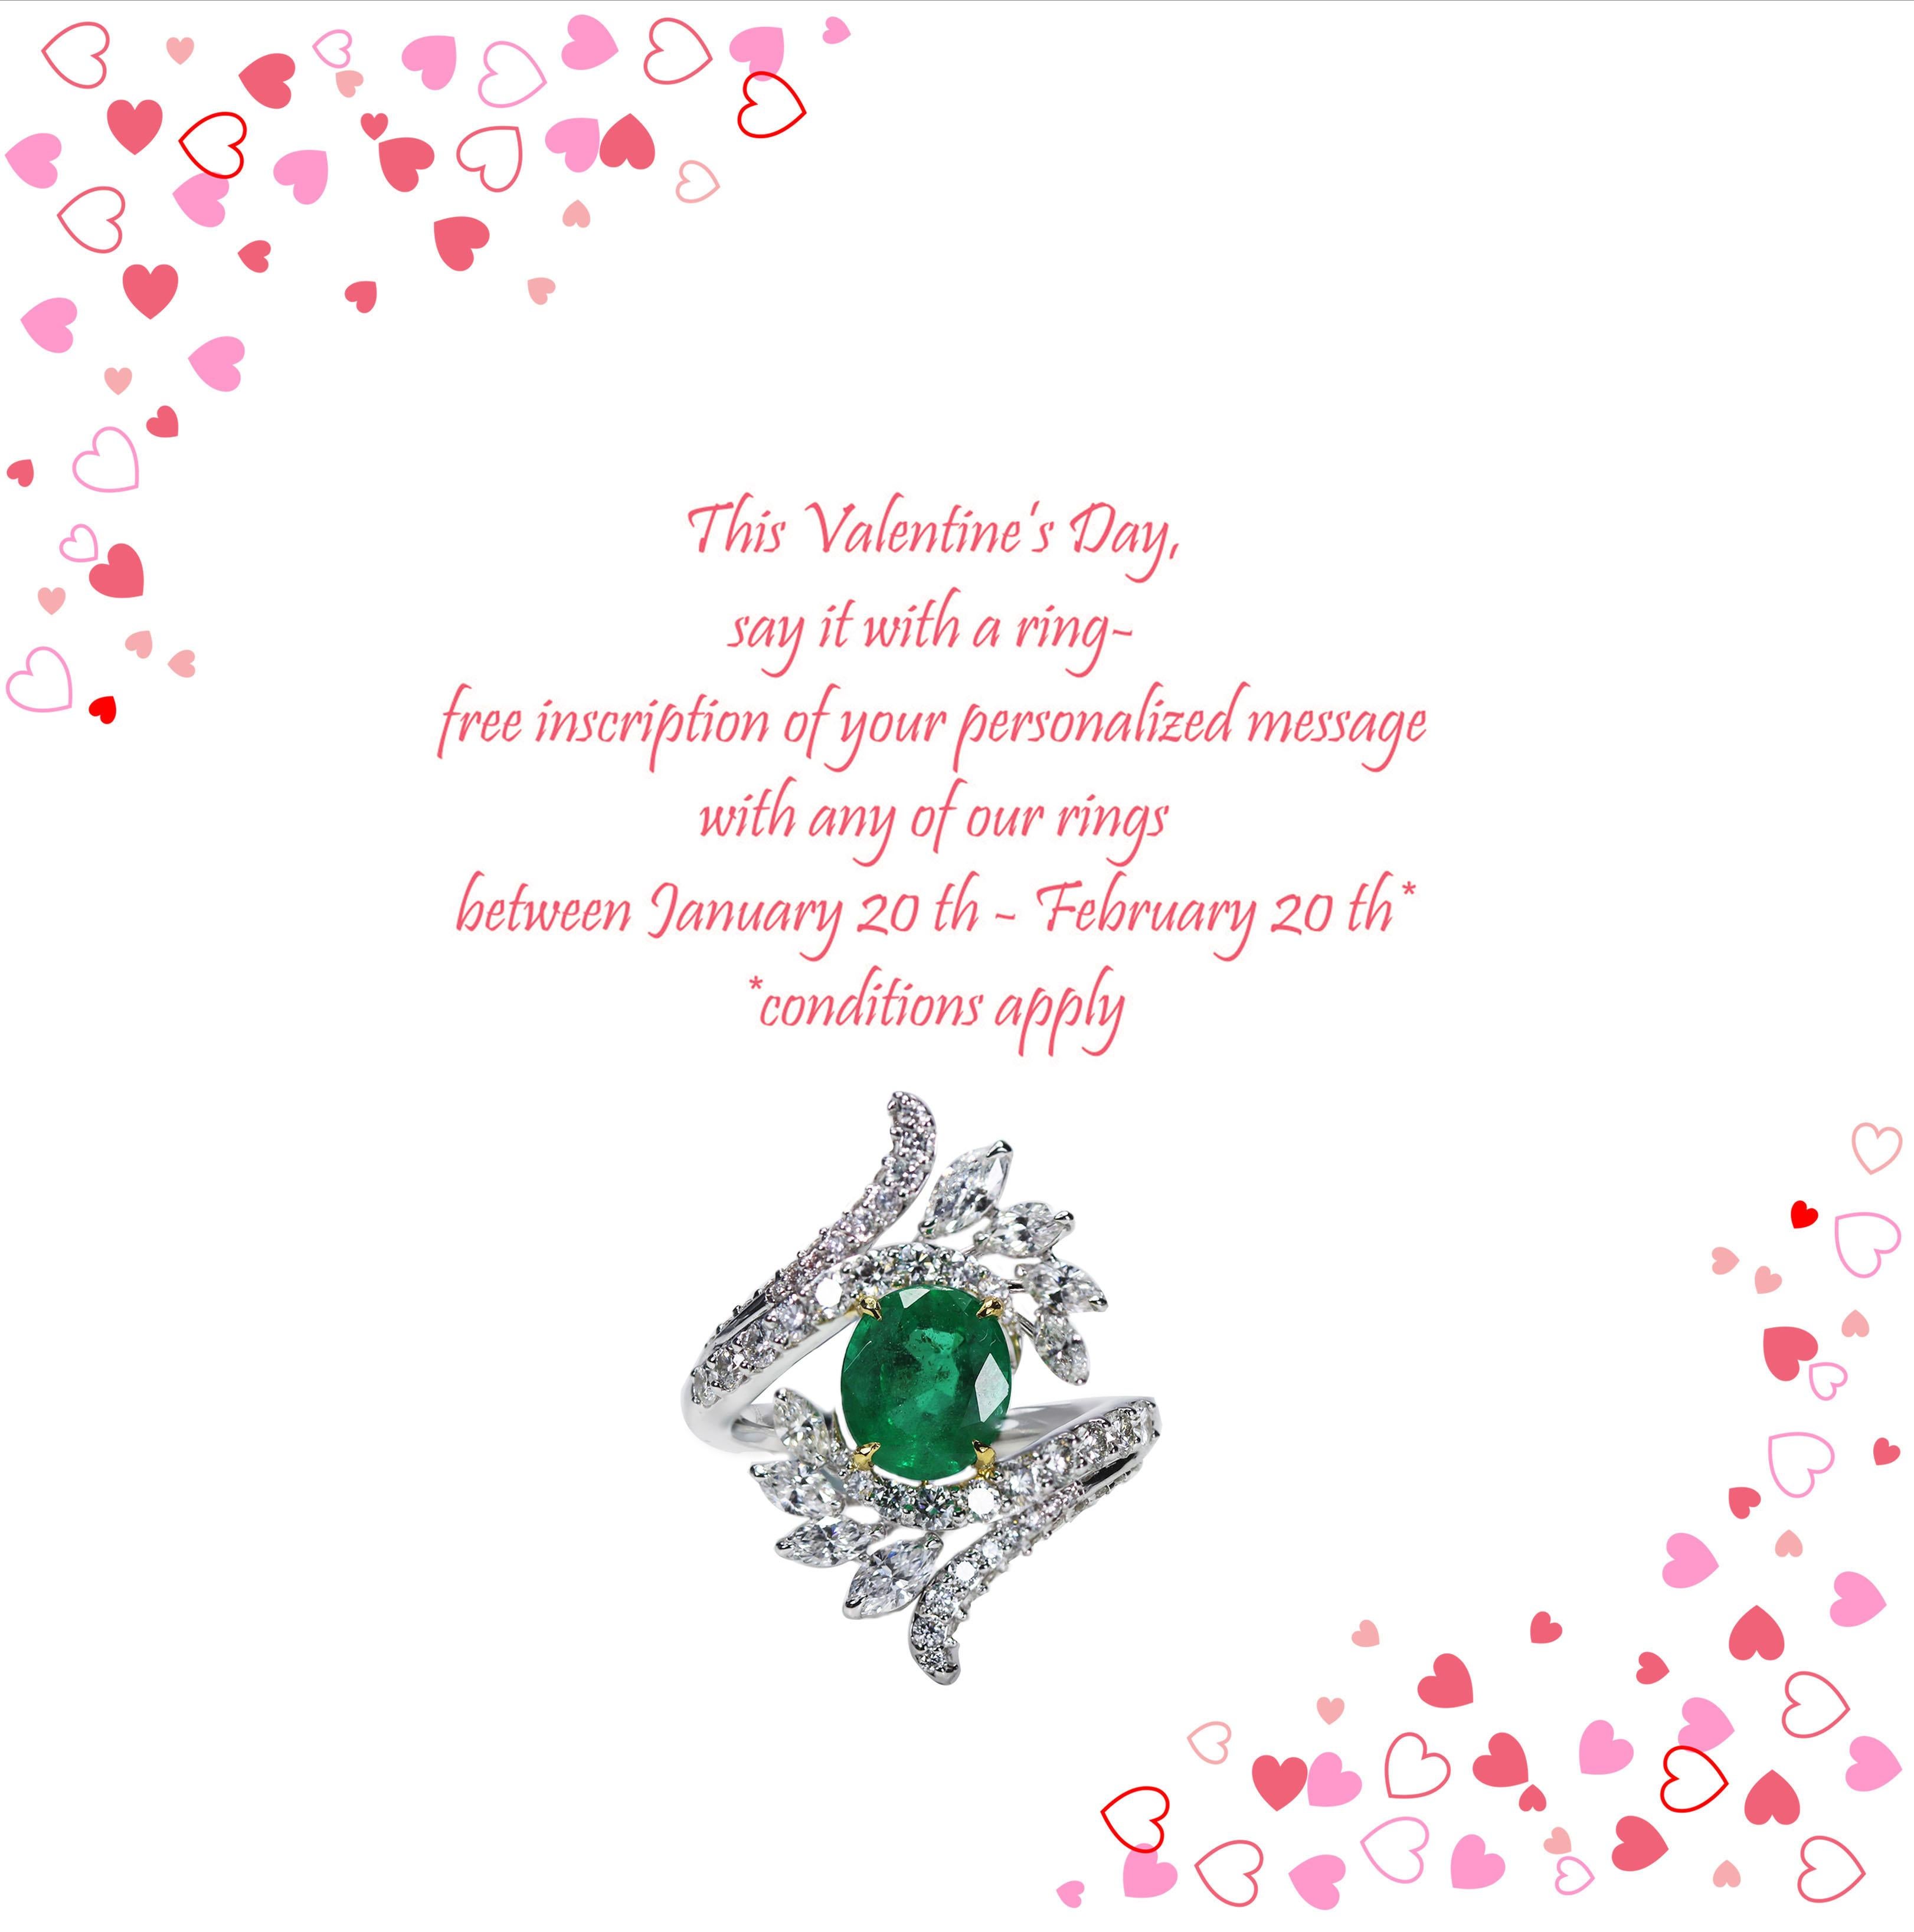 This Valentine’s Day, say it with a ring- free inscription of your personalized message with any of our rings between January 20 th - February 20 th* 

F-G/ VS-SI brilliant cut diamonds and emerald ring 

Make a scintillating statement with this